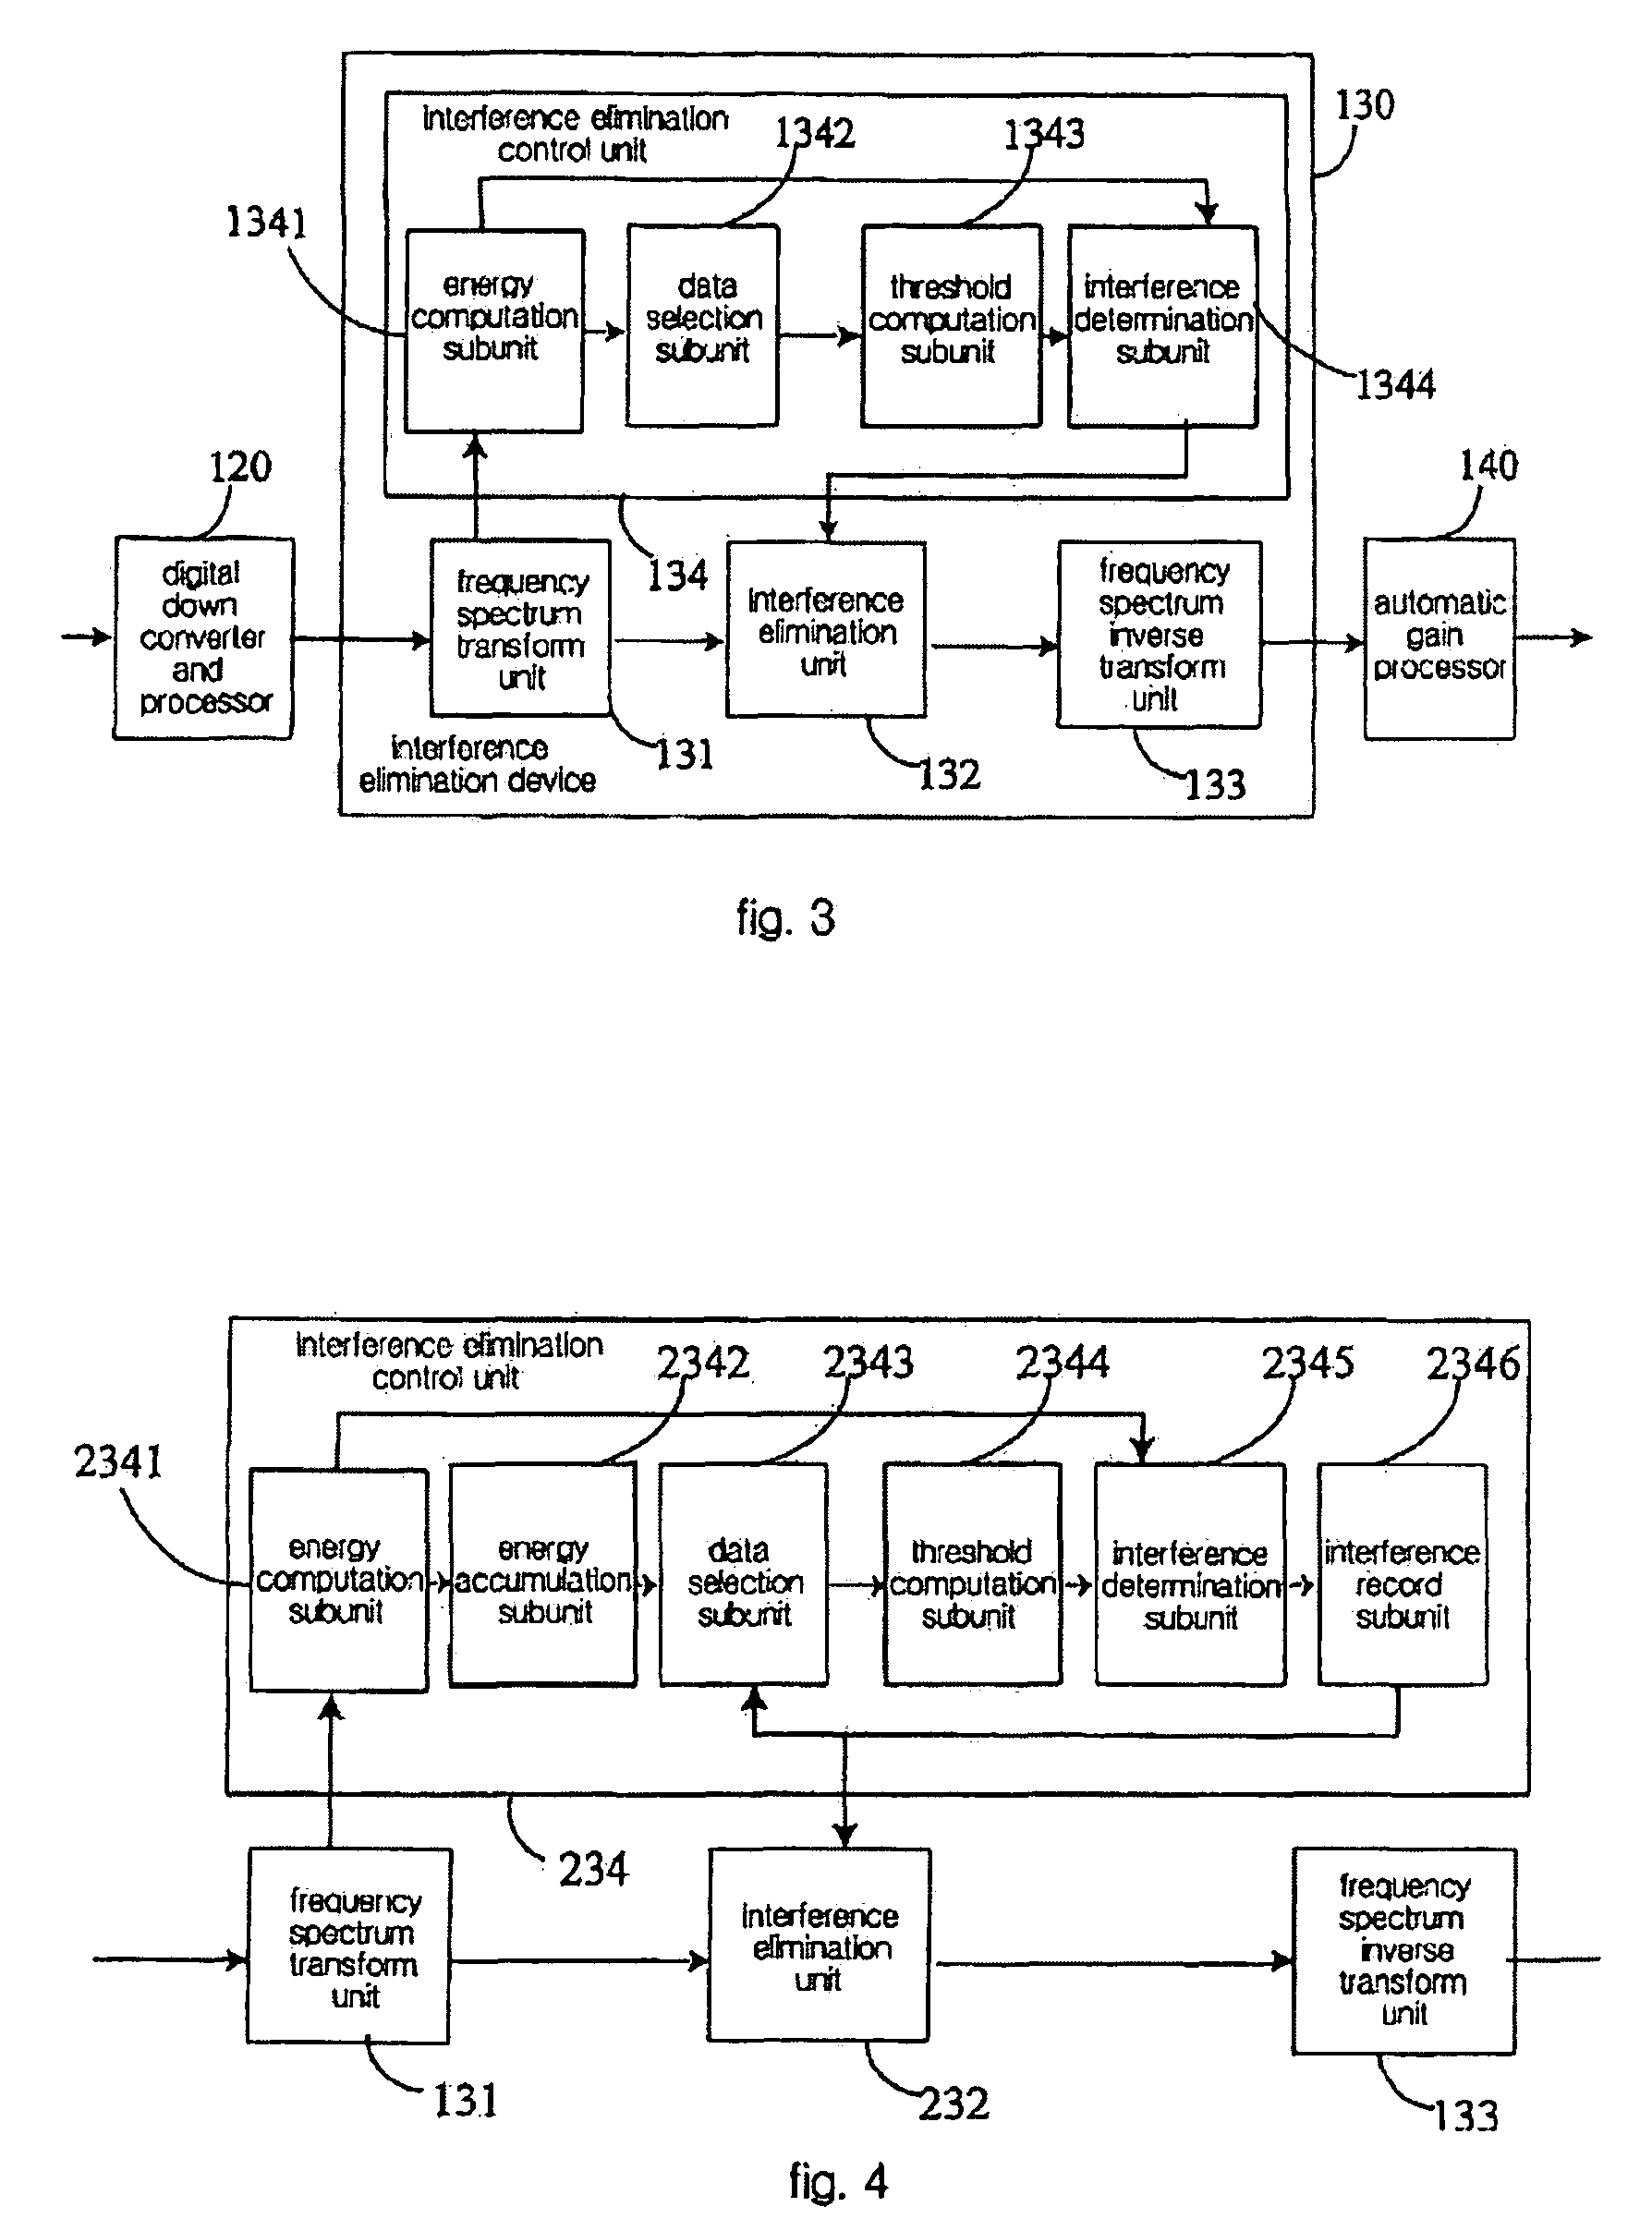 Method and device for removing narrow band interference in spreading frequency system